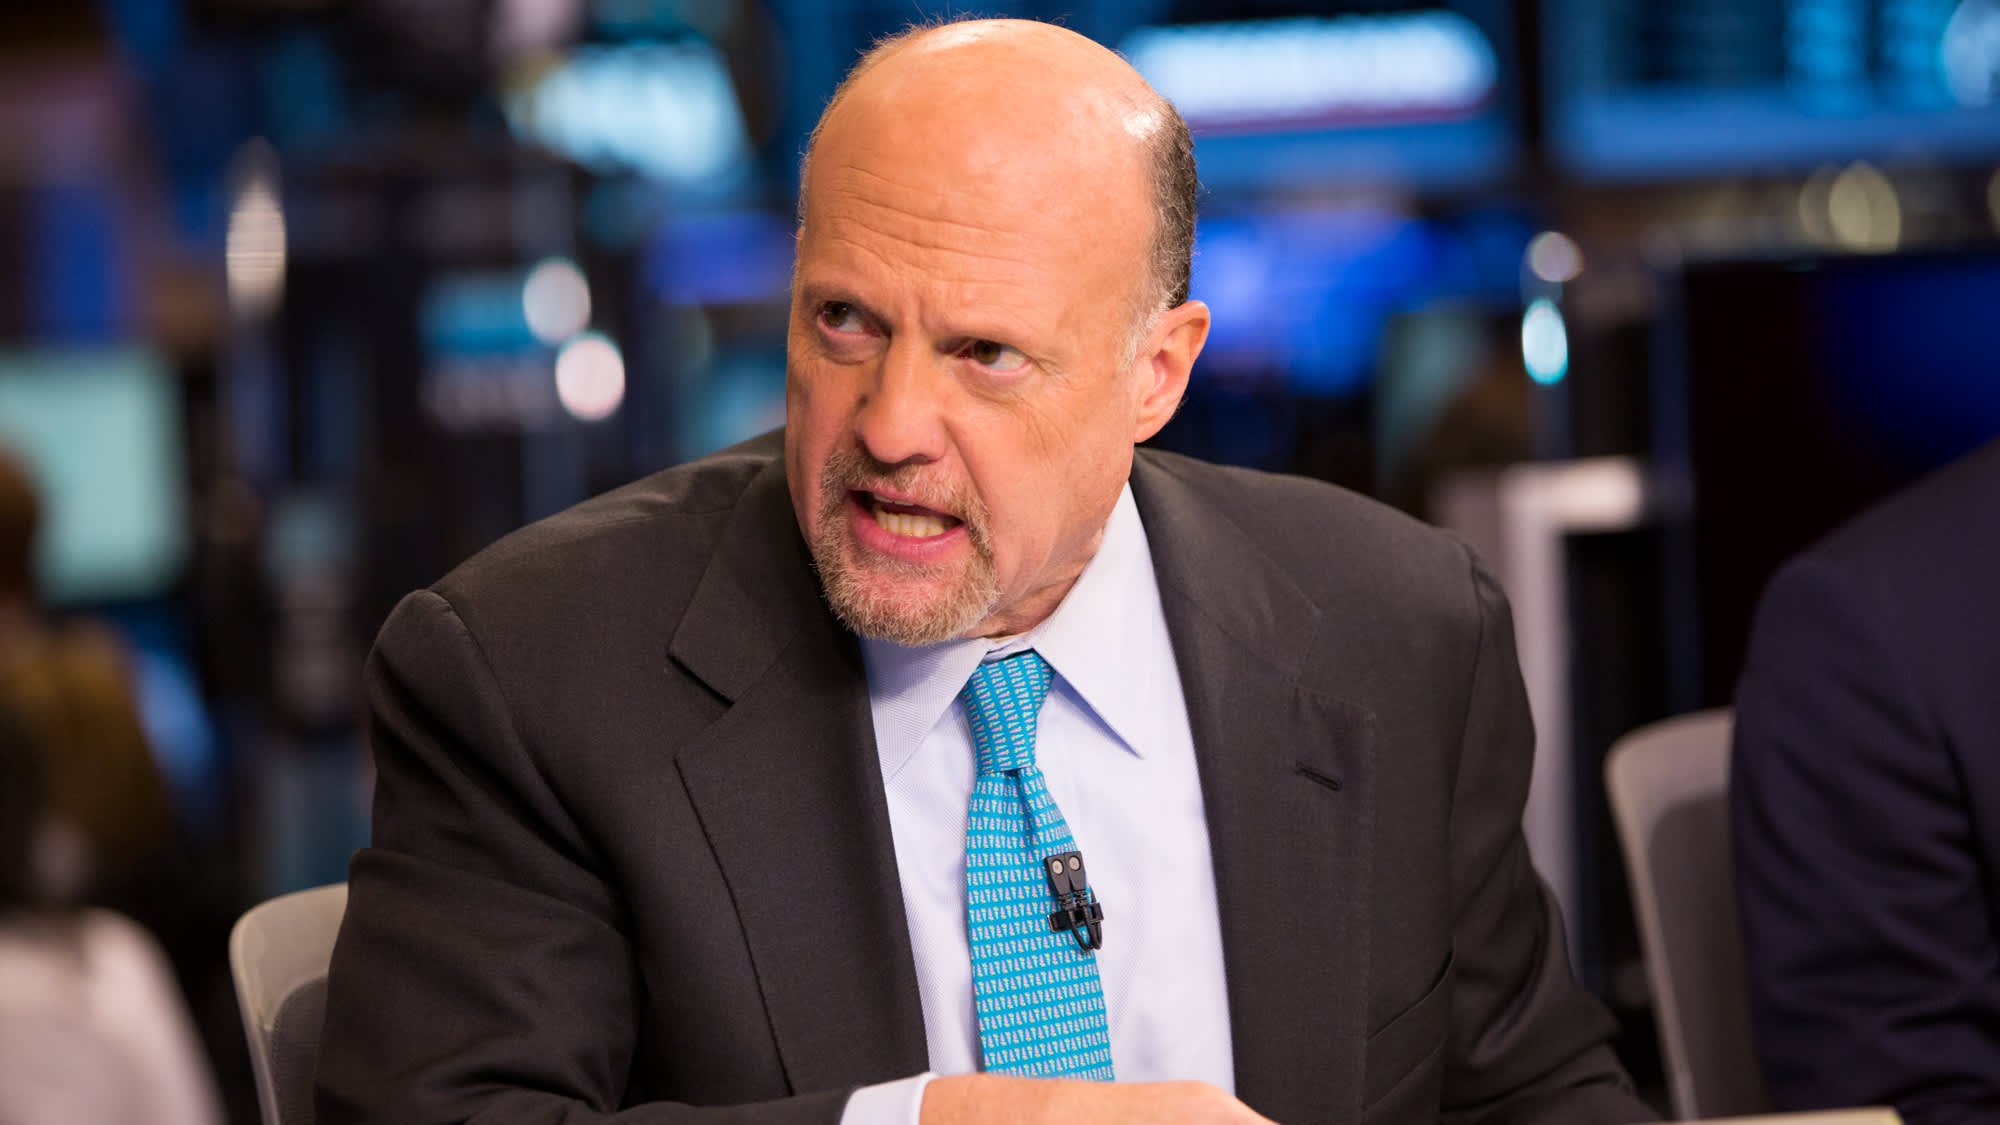 Cramer says investors should not rush to buy or sell outside of regular trading hours